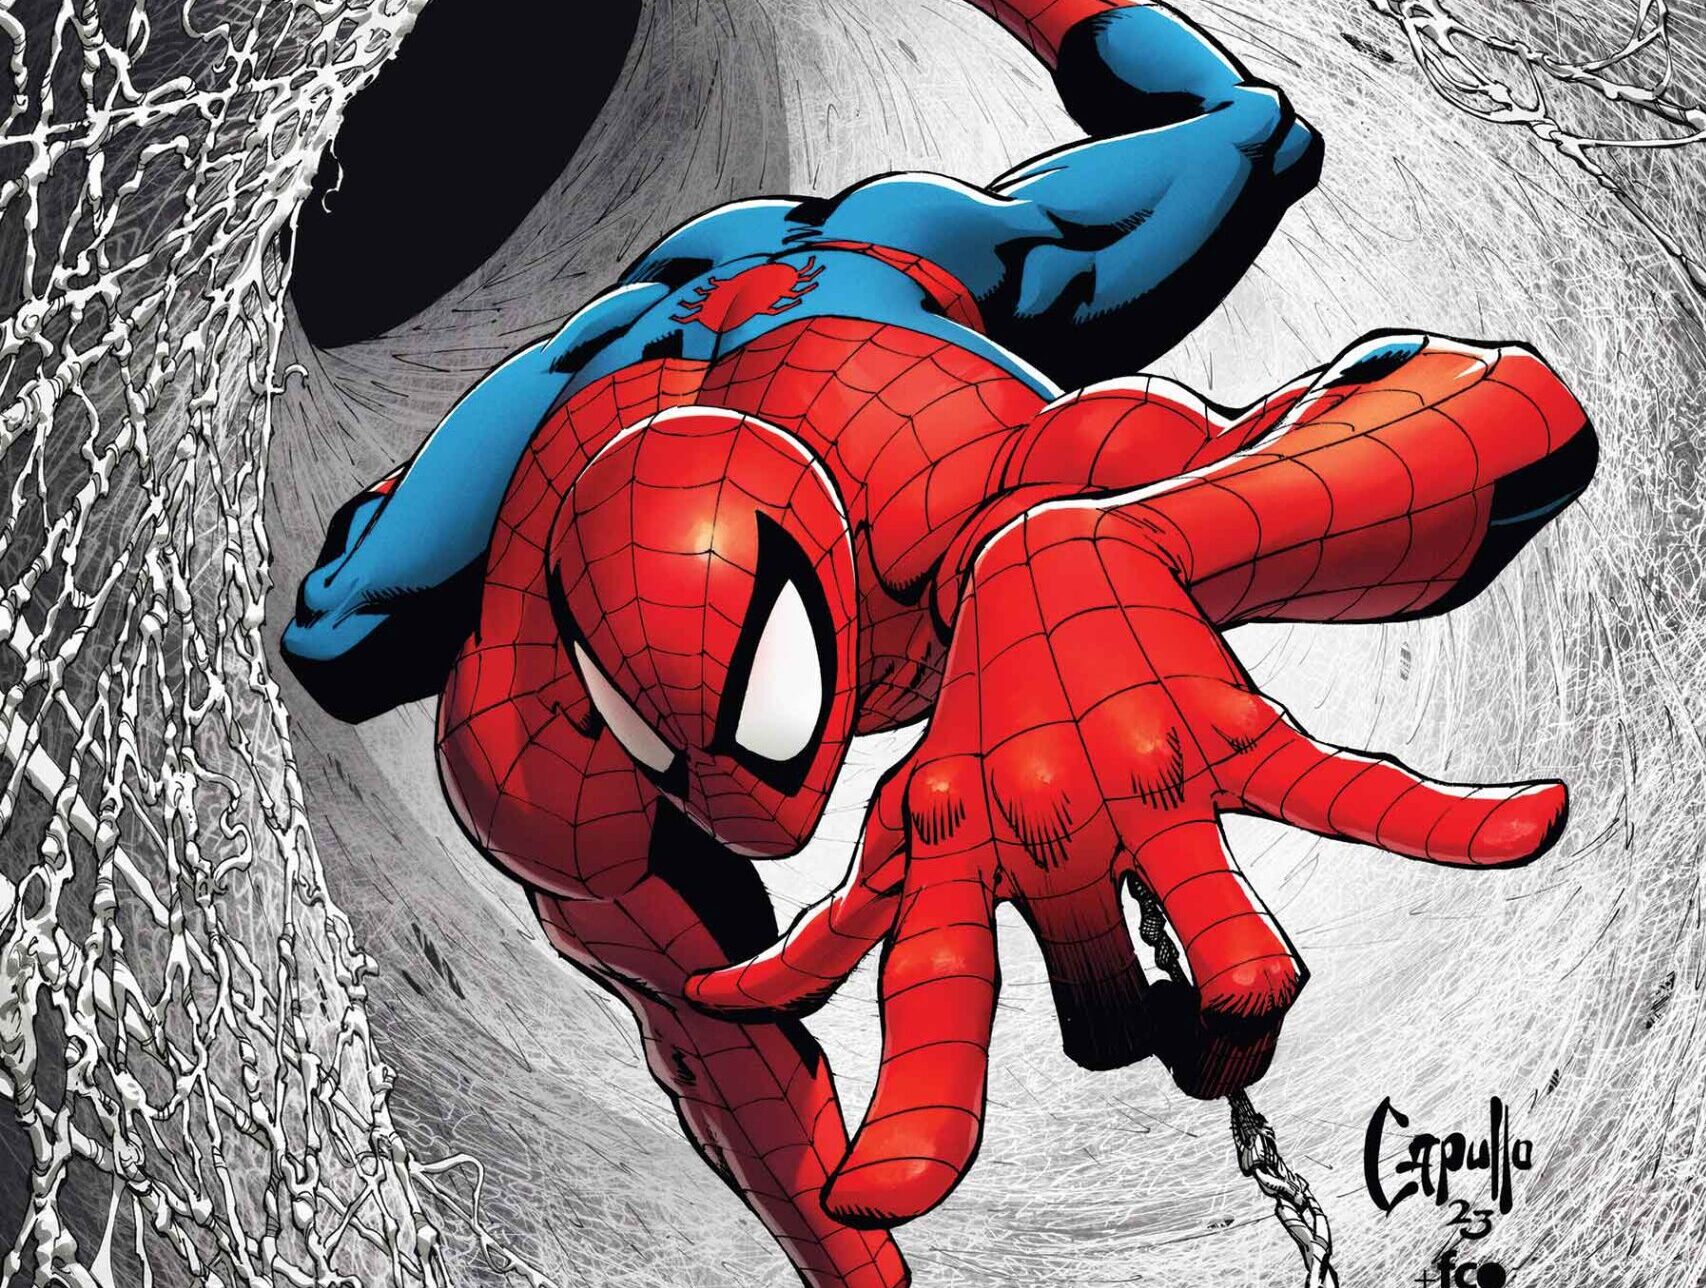 WEB OF SPIDER-MAN #1 Unveils A Spectacular New Chapter In Spider-Verse Saga